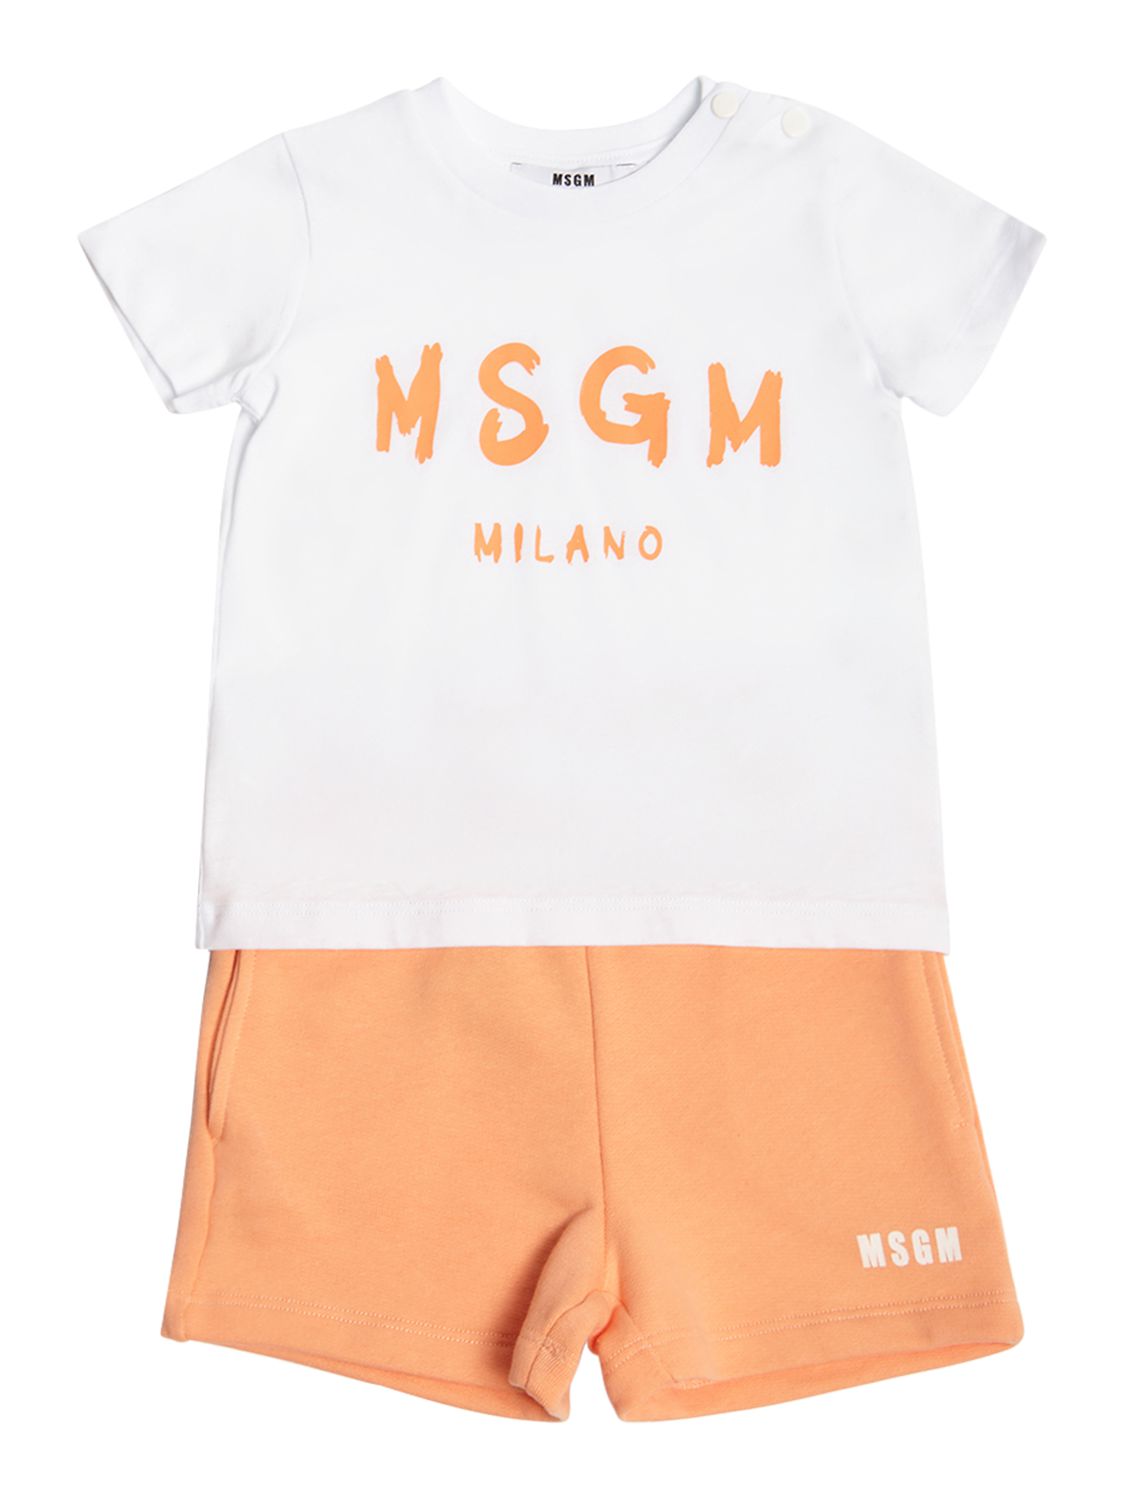 Msgm Kids' Cotton Jersey T-shirt & Shorts In White,pink